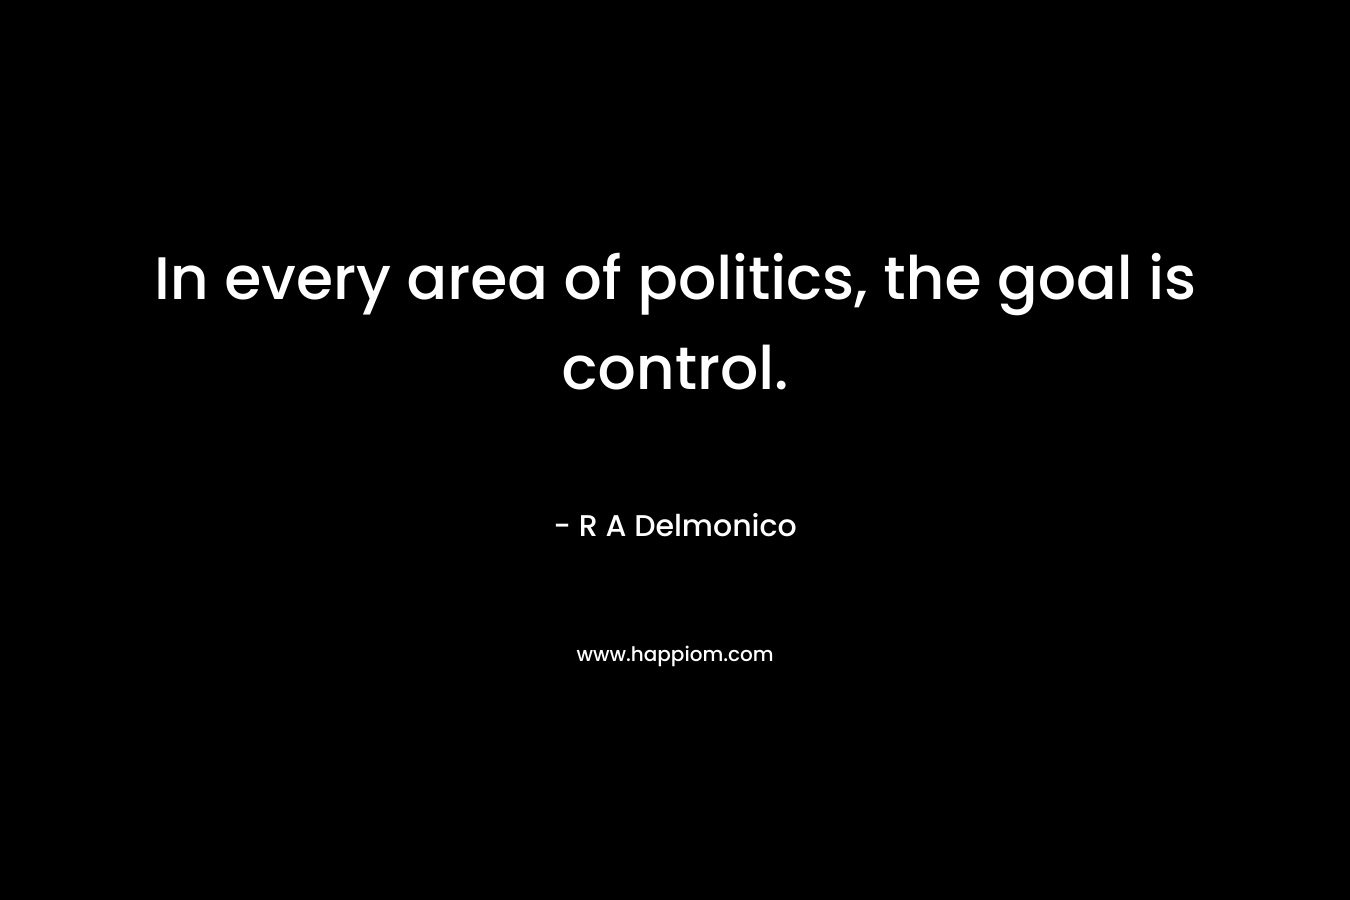 In every area of politics, the goal is control.